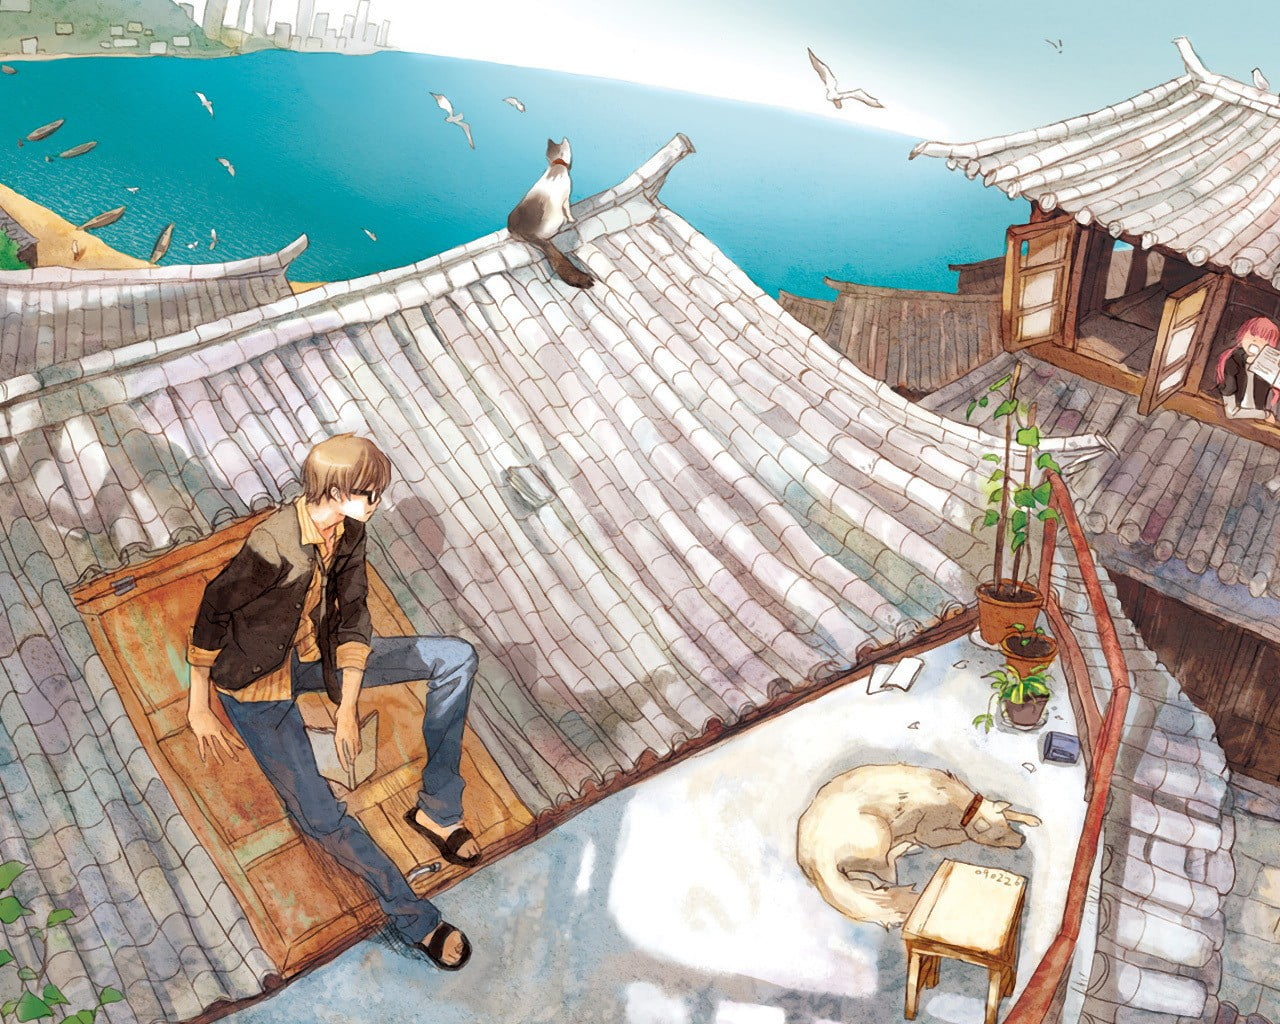 man sitting on roof anime character illustration